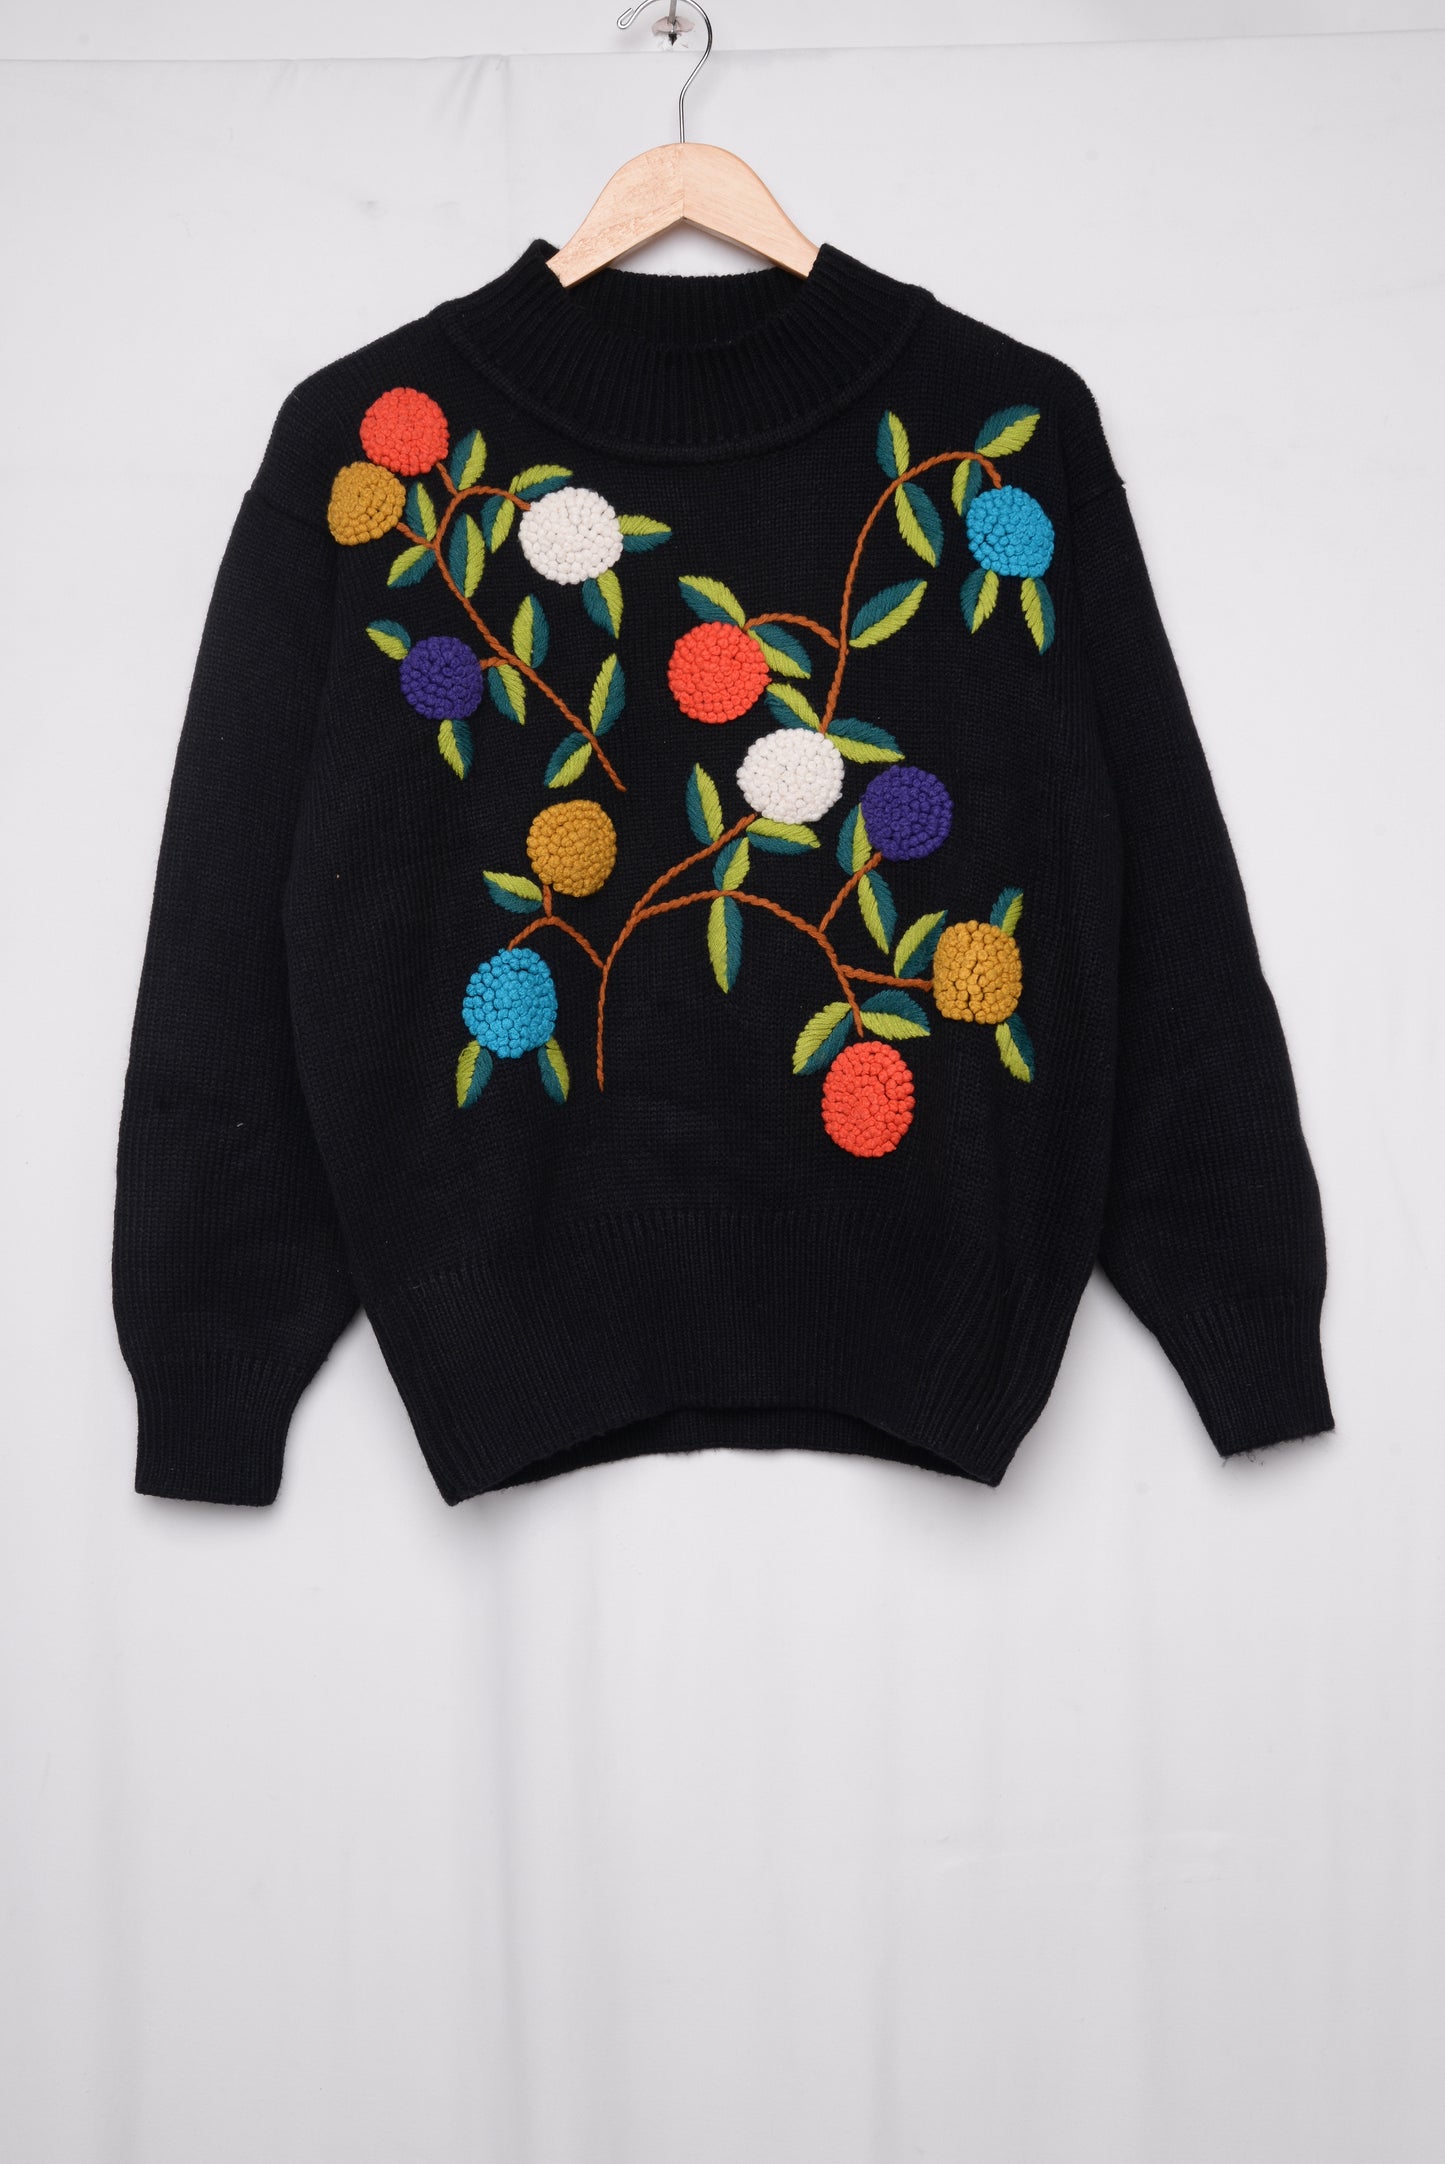 Embroidered Floral Sweater